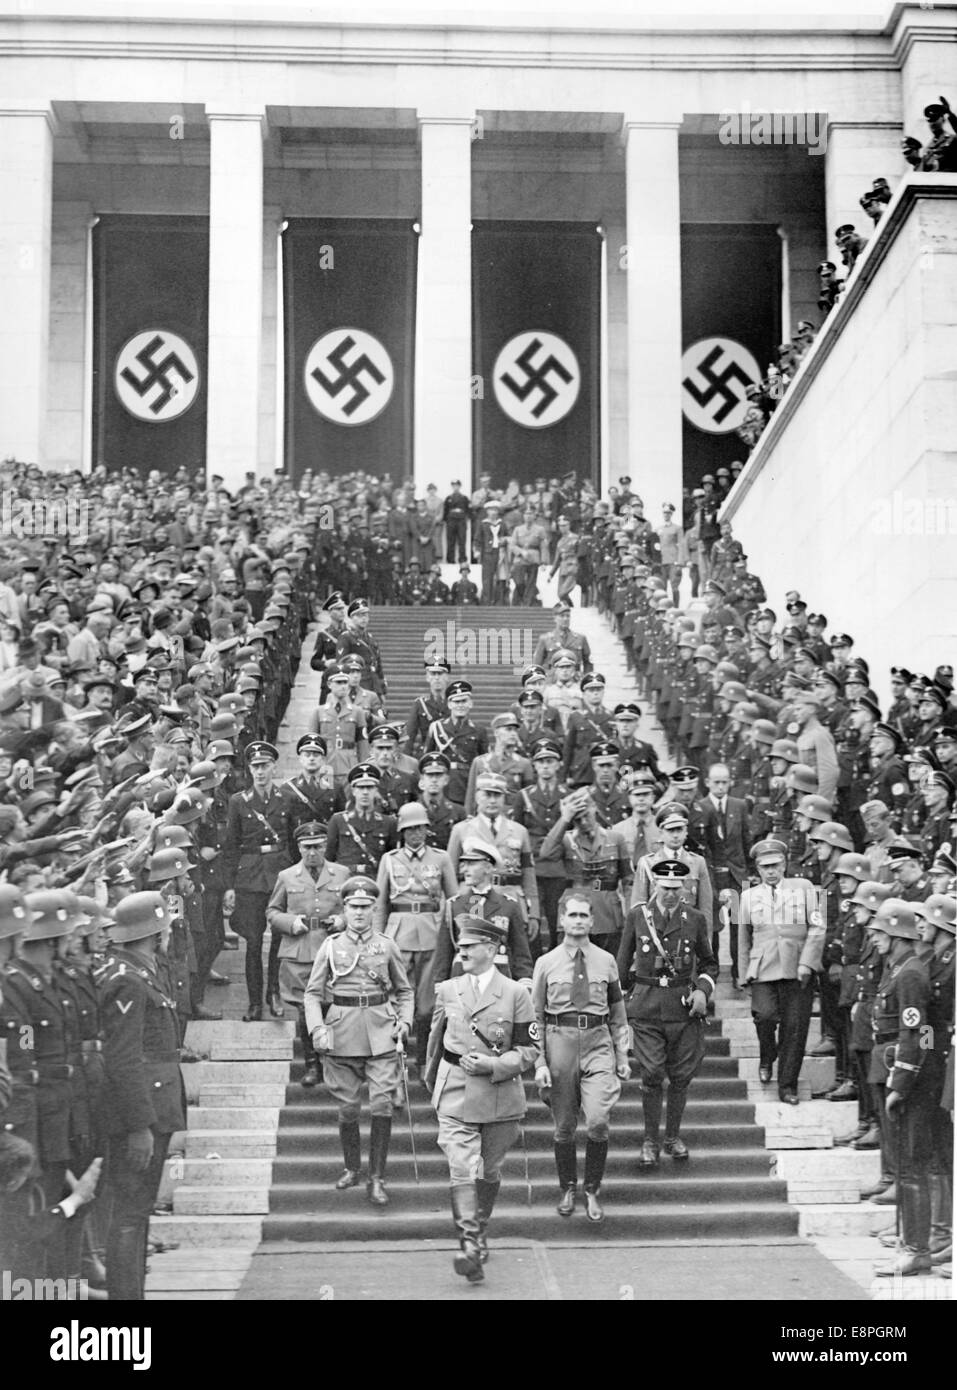 Nuremberg Rally 1936 in Nuremberg, Germany - Adolf Hitler walks down the stairs of the grandstand to accept the march-past of the Nazi army (Wehrmacht) on Zeppelin Field at the Nazi party rally grounds. Behind Hitler to the right: Reich Minister Rudolf Hess. (Flaws in quality due to the historic picture copy) Fotoarchiv für Zeitgeschichtee - NO WIRE SERVICE - Stock Photo